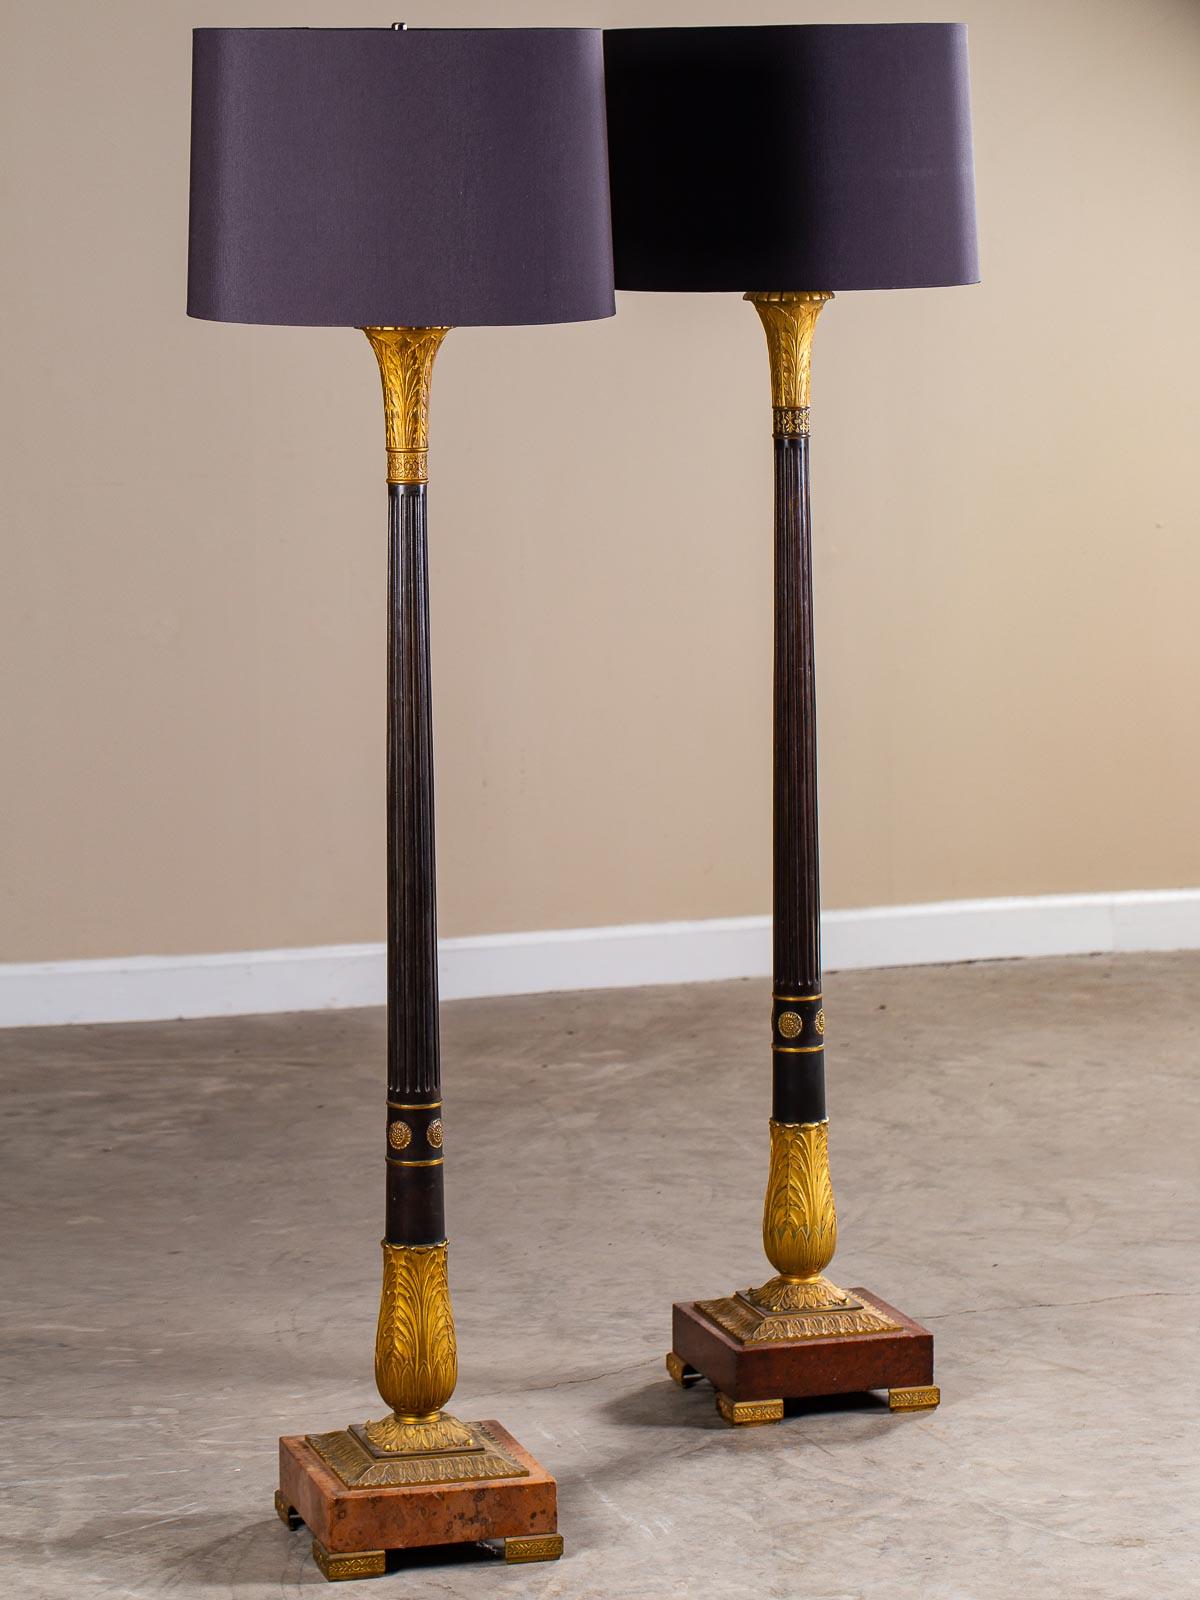 A pair of antique French Neoclassical bronze gilt bronze candlestand floor lamps circa 1900. This pair of French floor lamps has a marvelous amount of detail reflecting the Belle Époque period interest in lavish decoration while taking advantage of